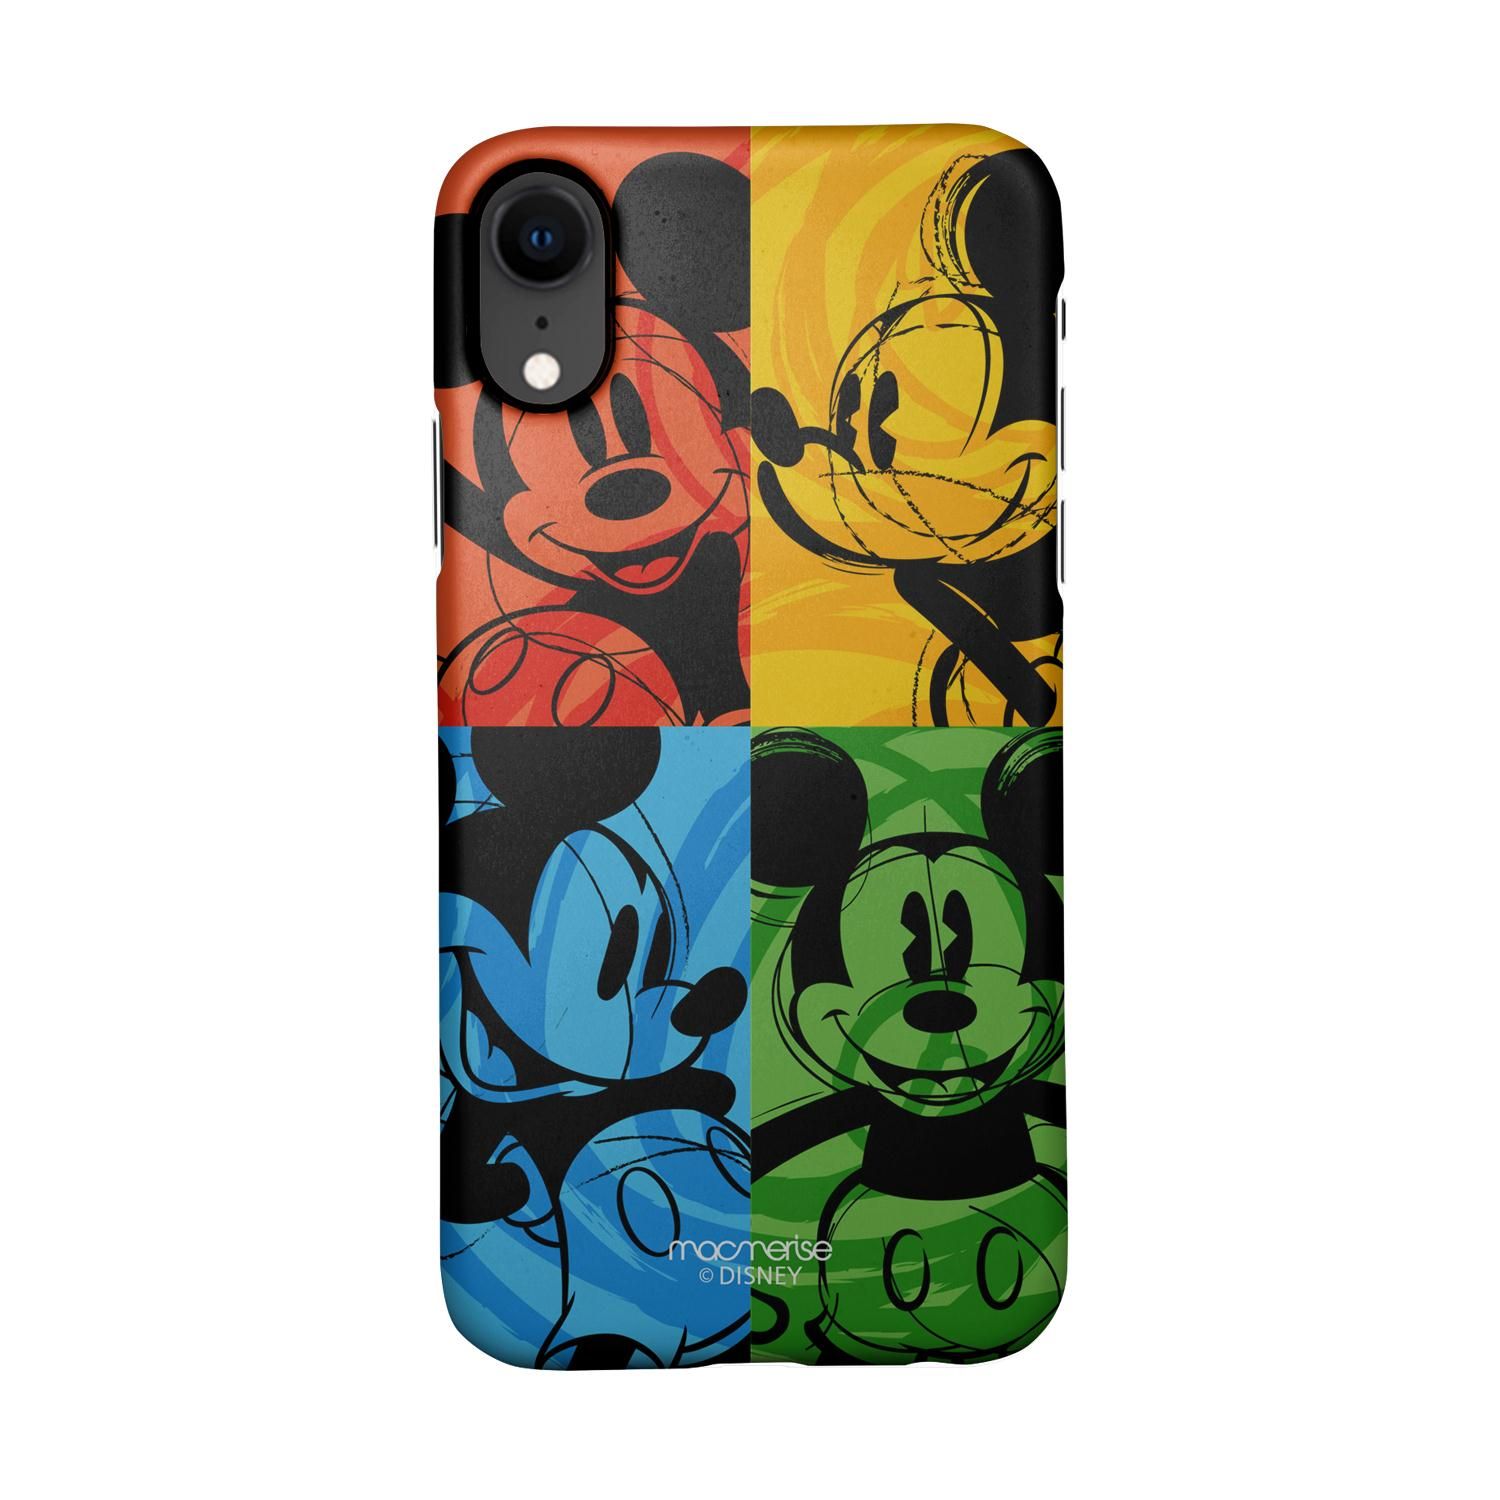 Buy Shades of Mickey - Sleek Phone Case for iPhone XR Online